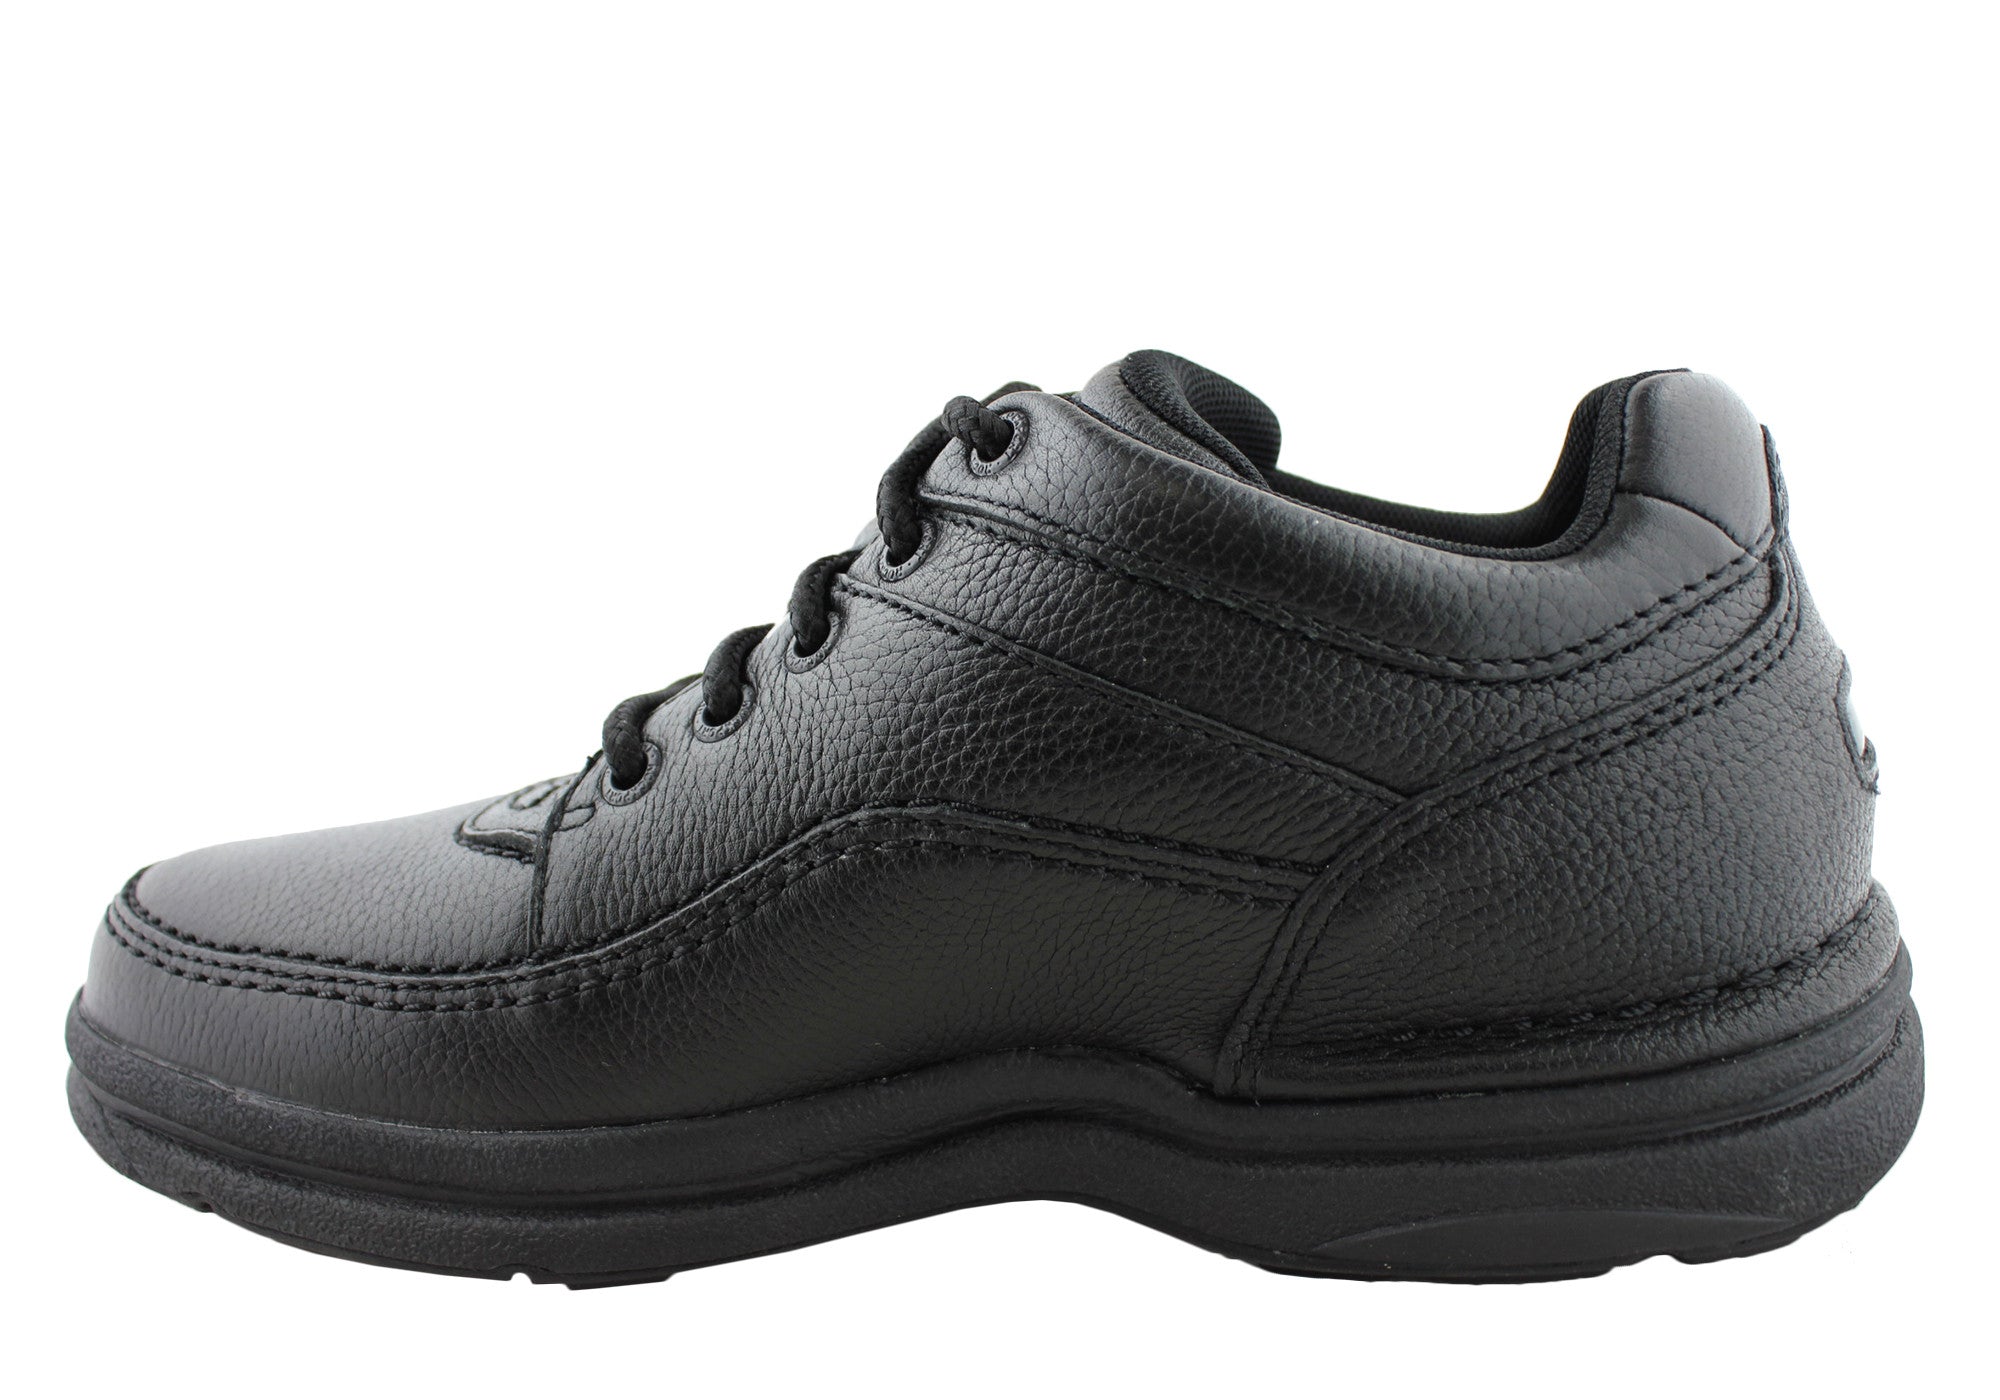 Rockport World Tour Classic Mens Comfort Wide Fit Walking Shoes | Brand ...